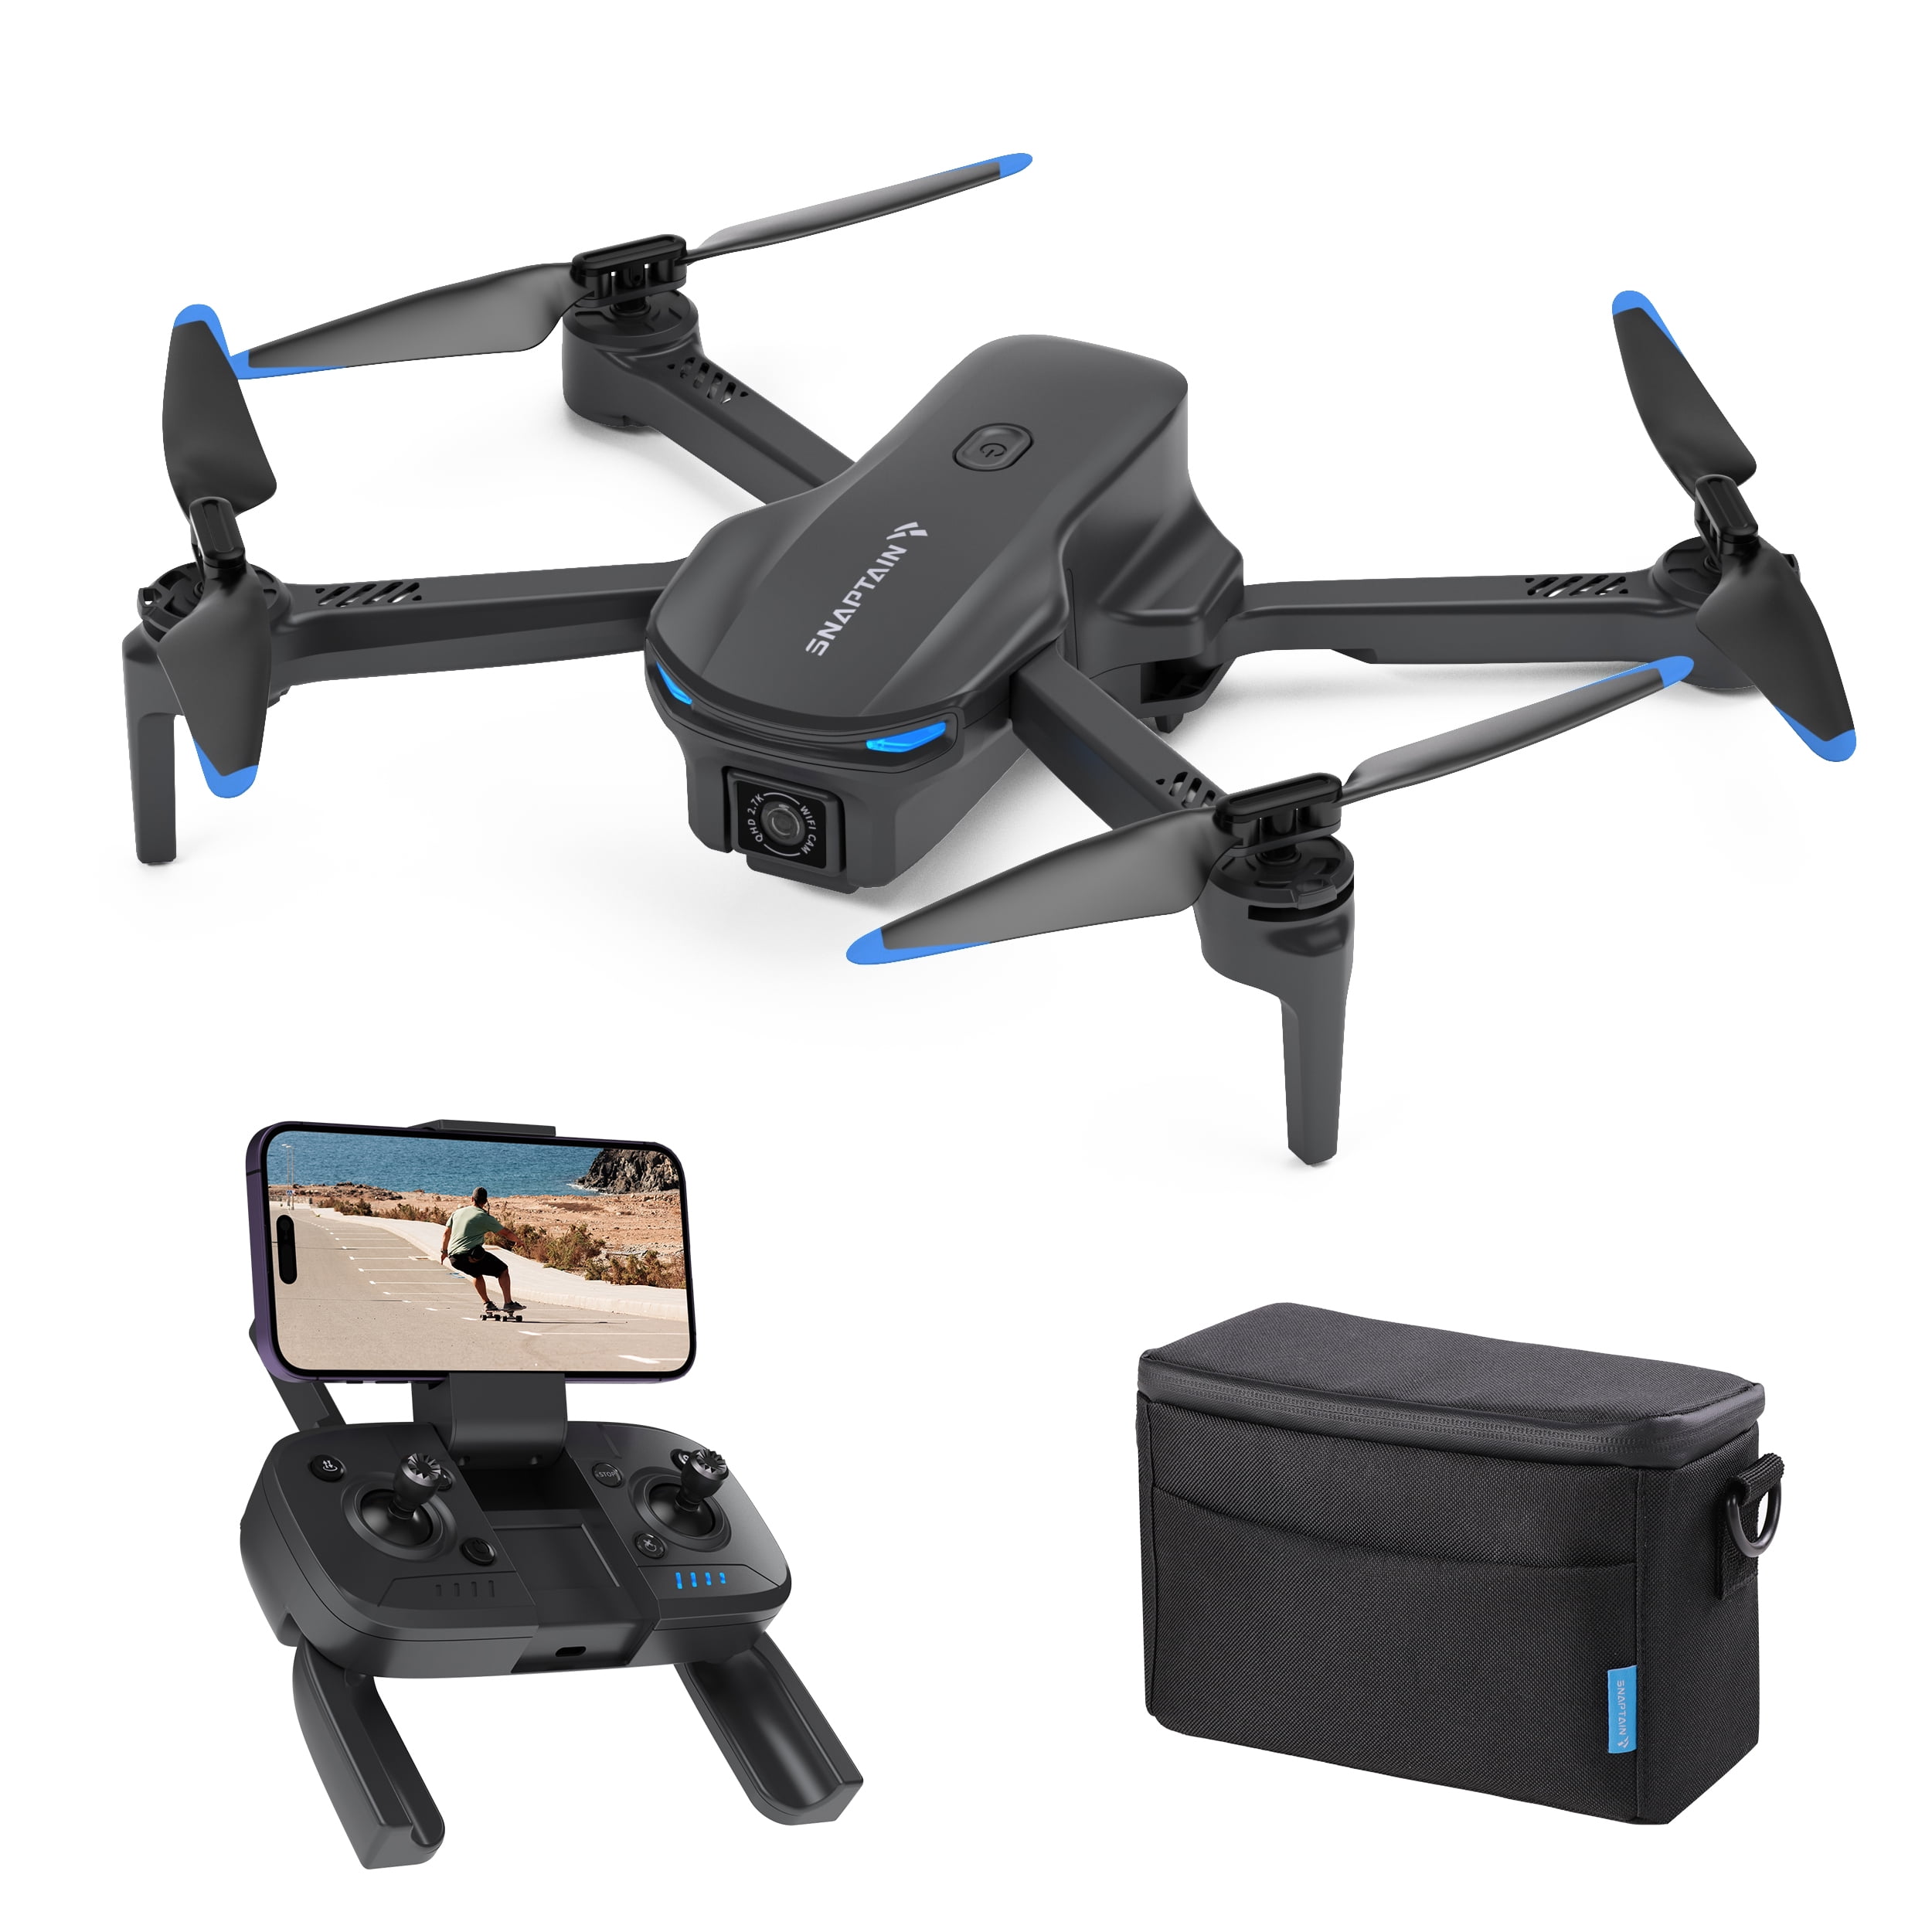 SNAPTAIN P30 4k UHD Drone with Camera GPS Live Video, Brushless